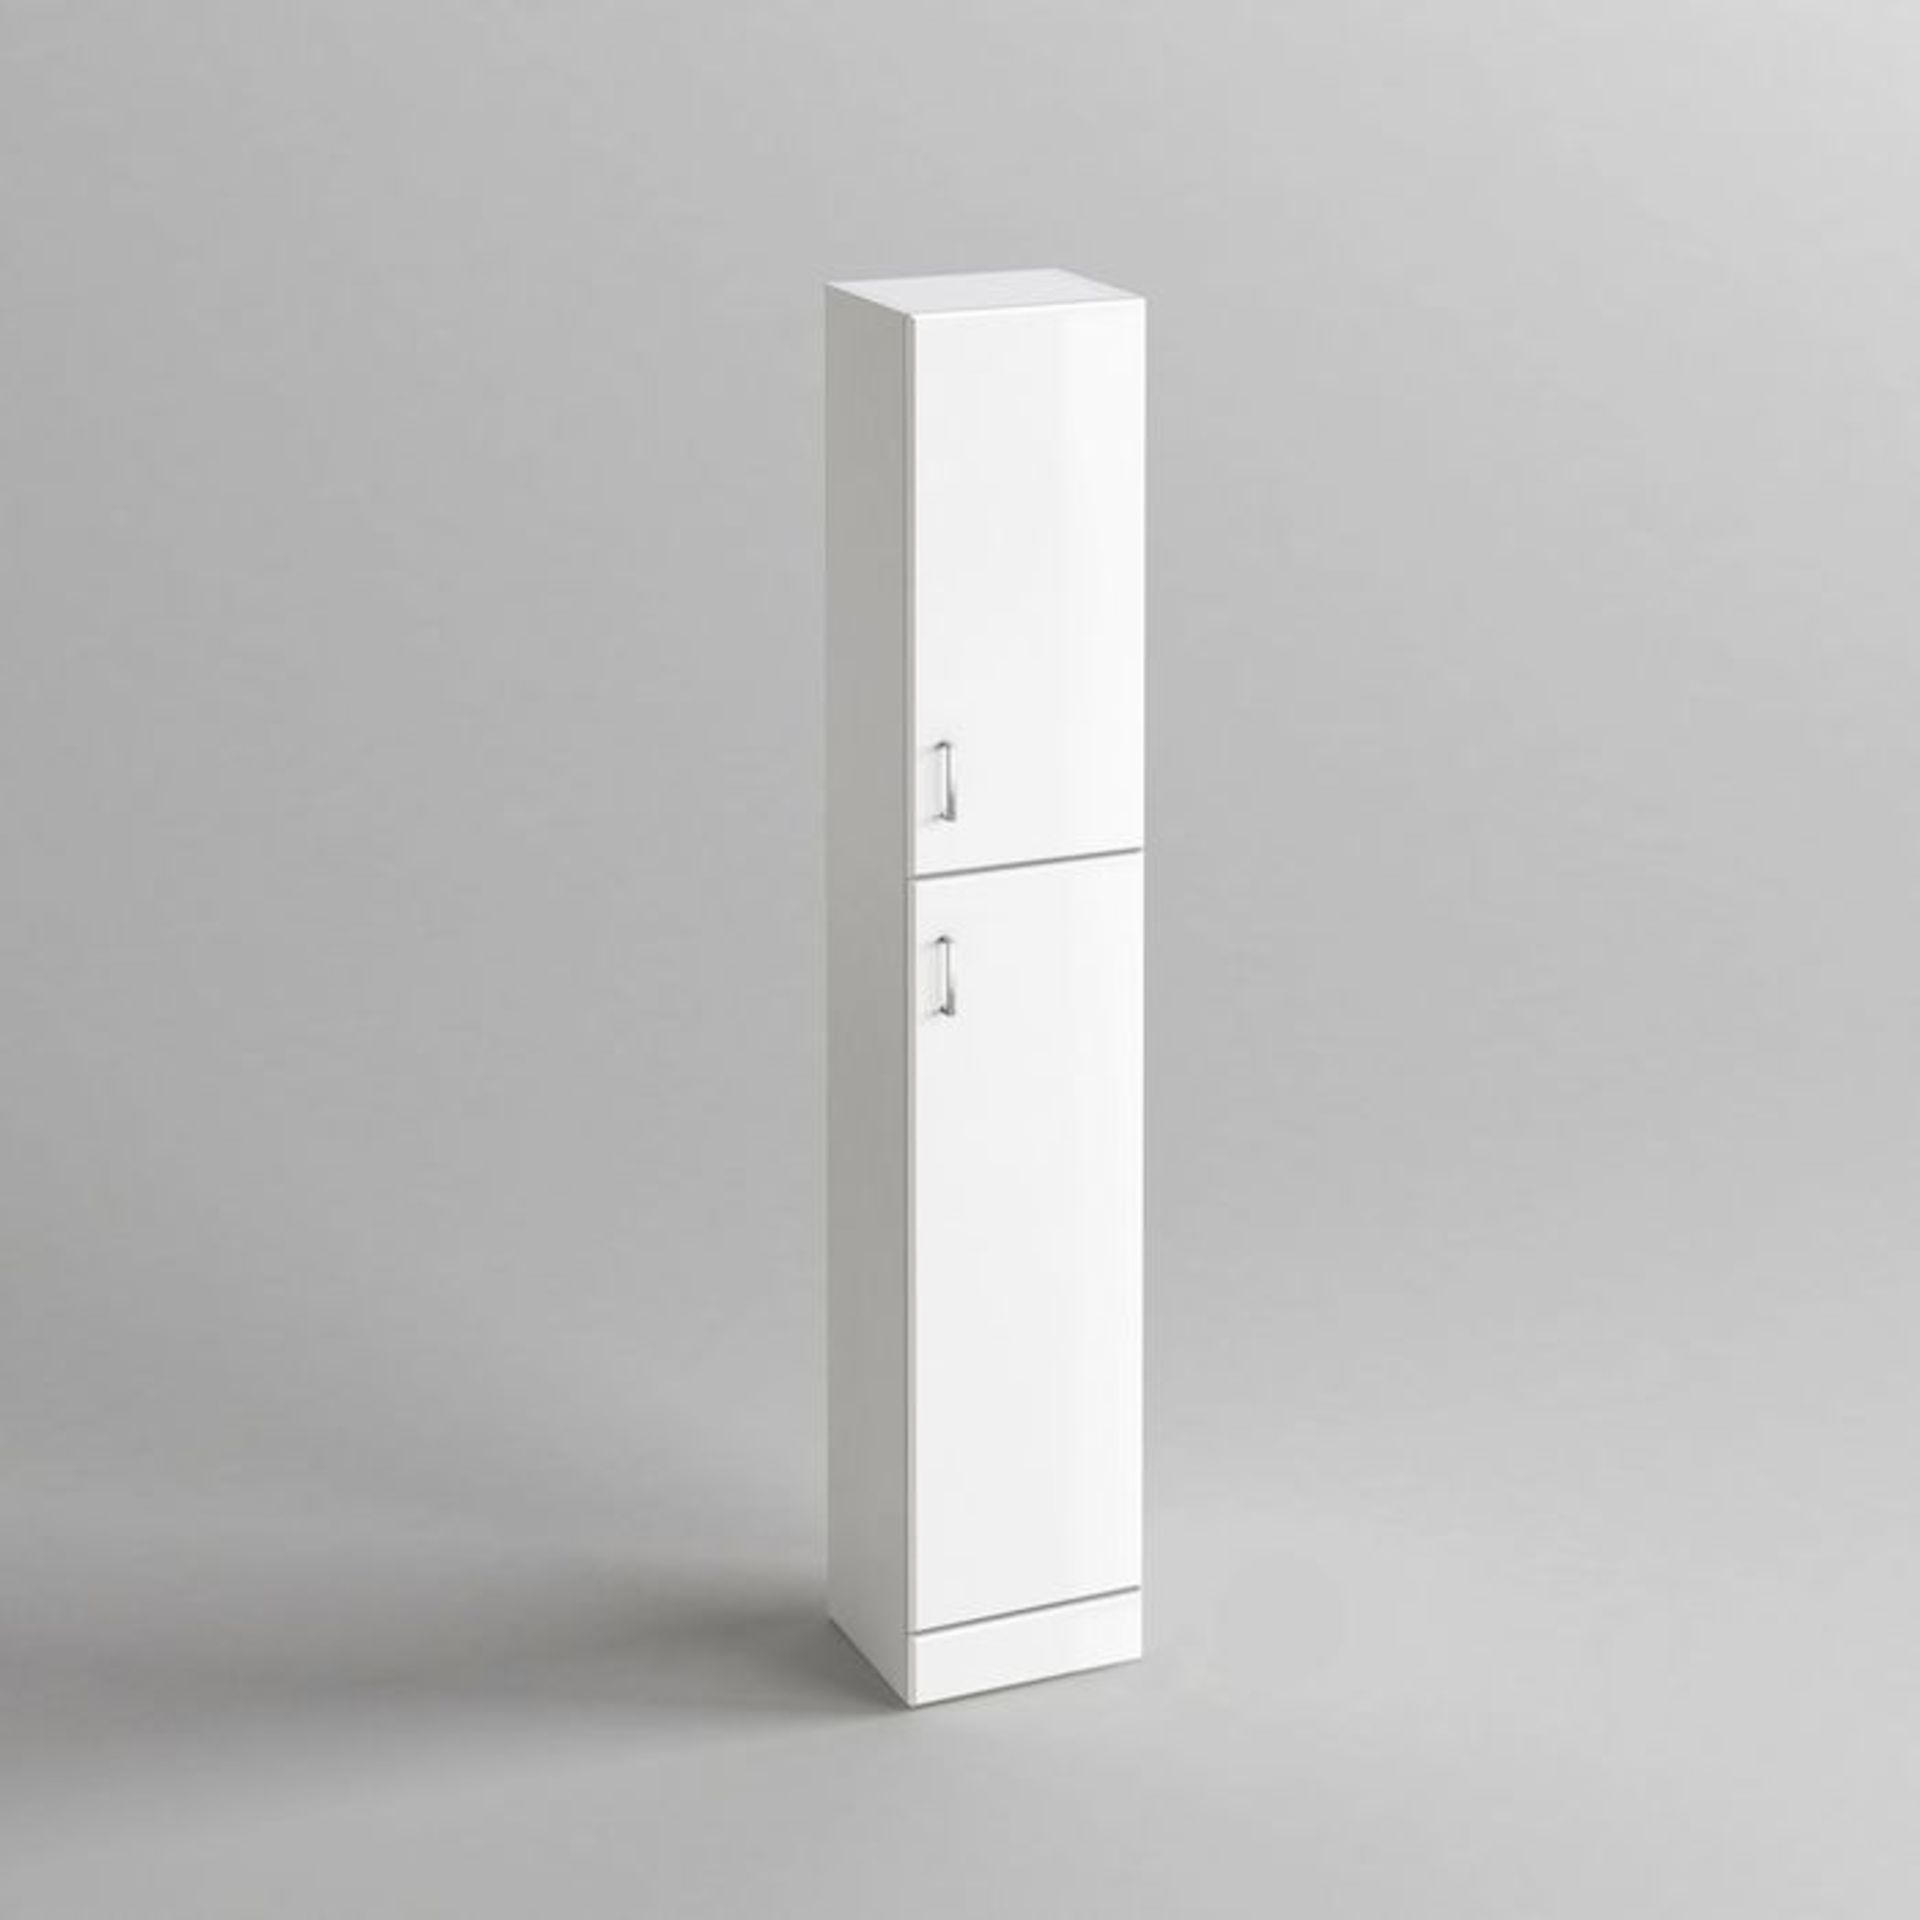 (OS69) 1900x300mm Quartz Gloss White Tall Storage Cabinet - Floor Standing. RRP £299.99. Pristine - Image 4 of 5